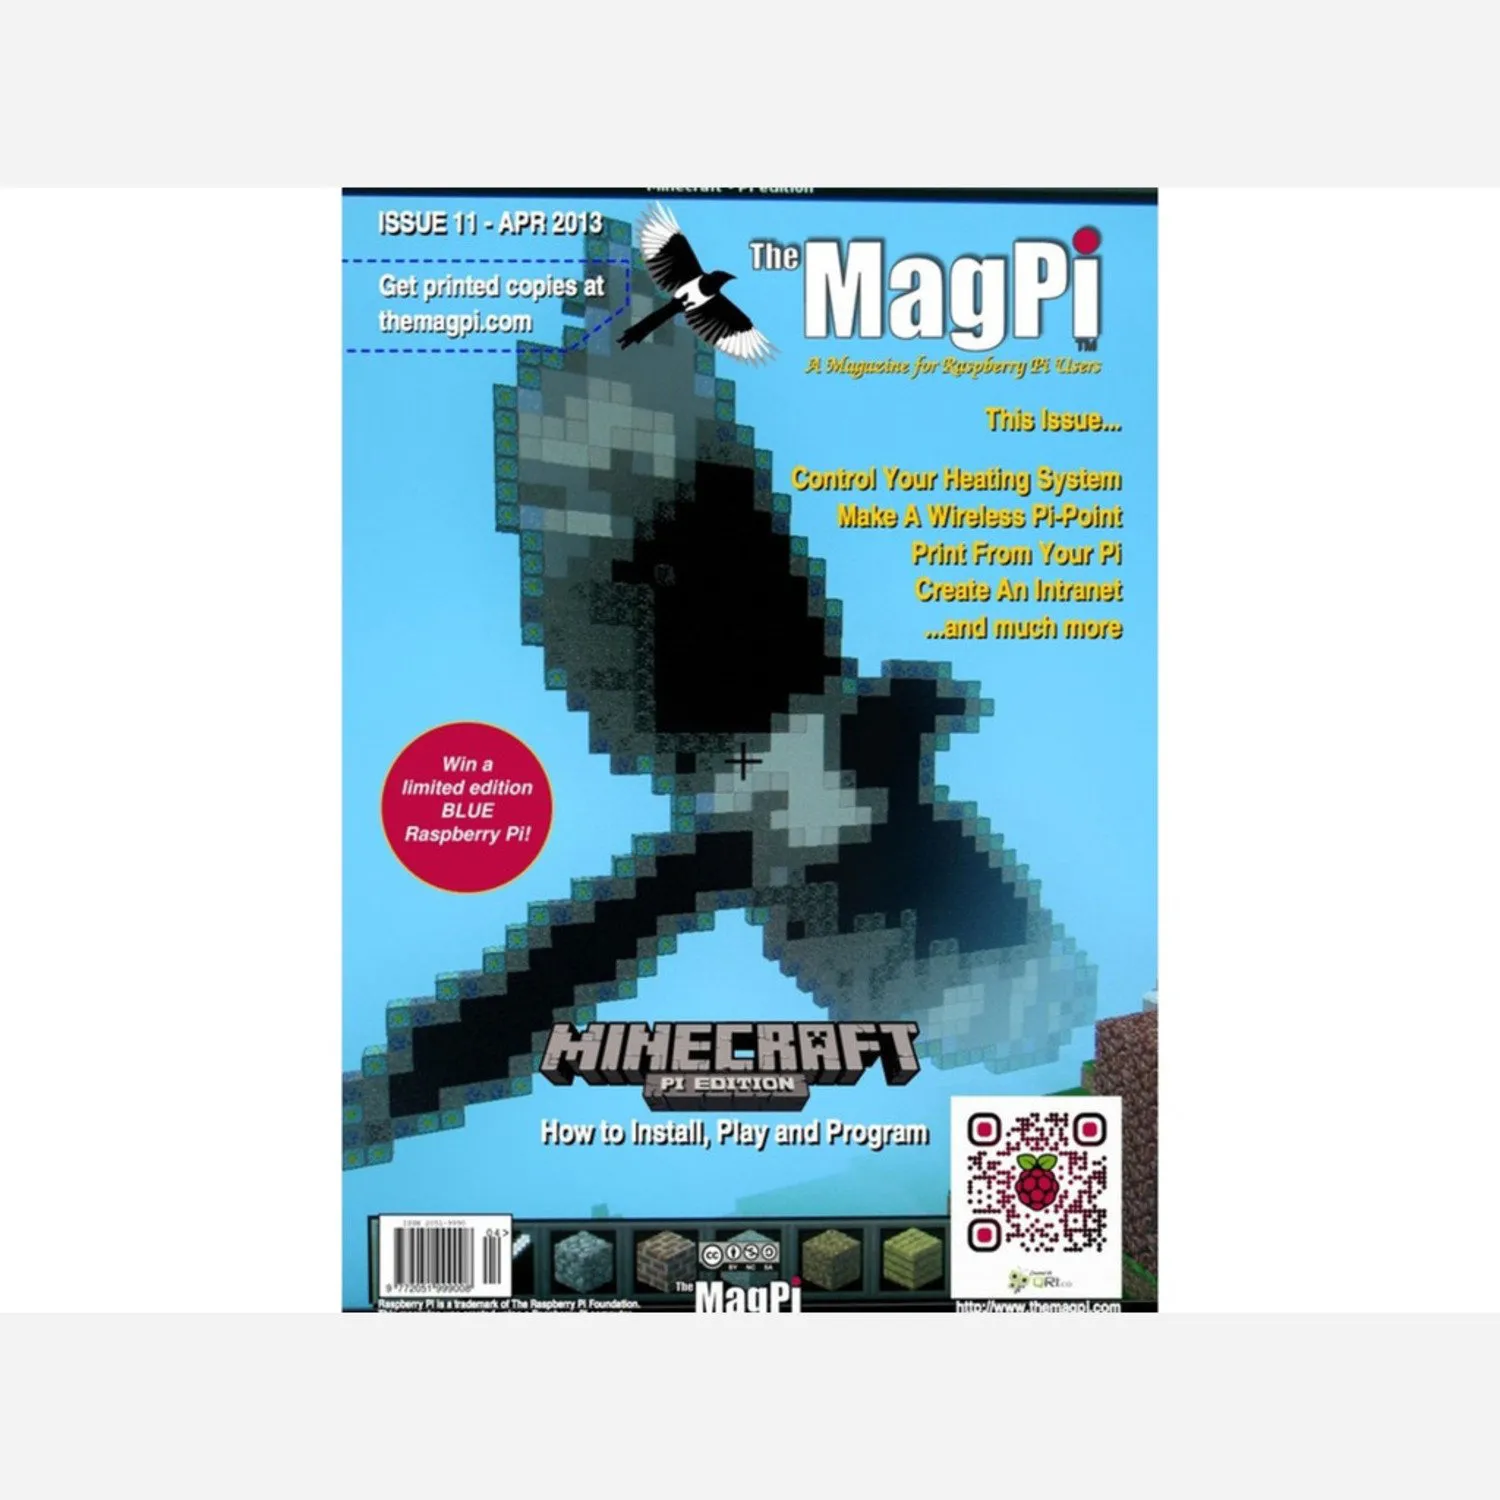 Photo of The MagPi - Issue 11